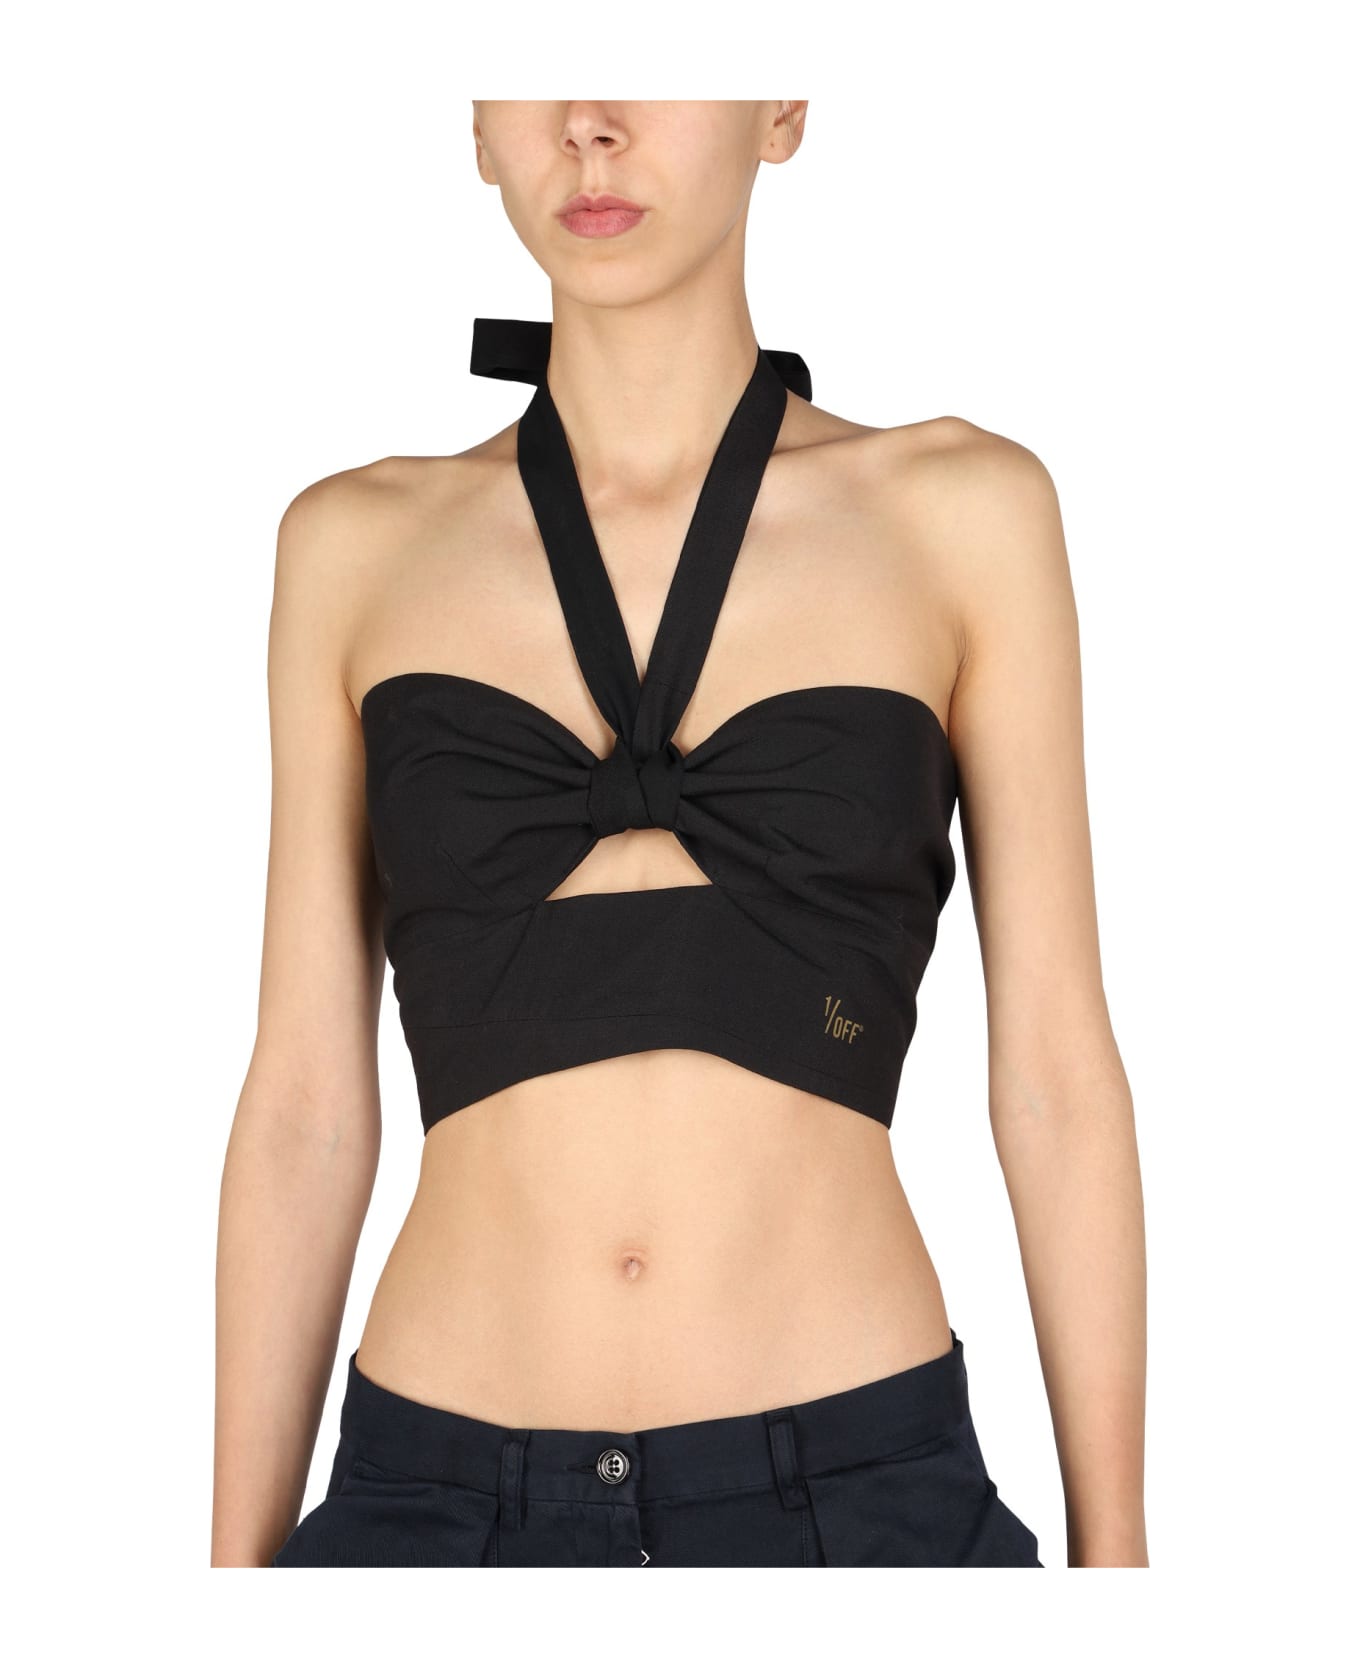 1/OFF Top With Crossed Straps - NERO